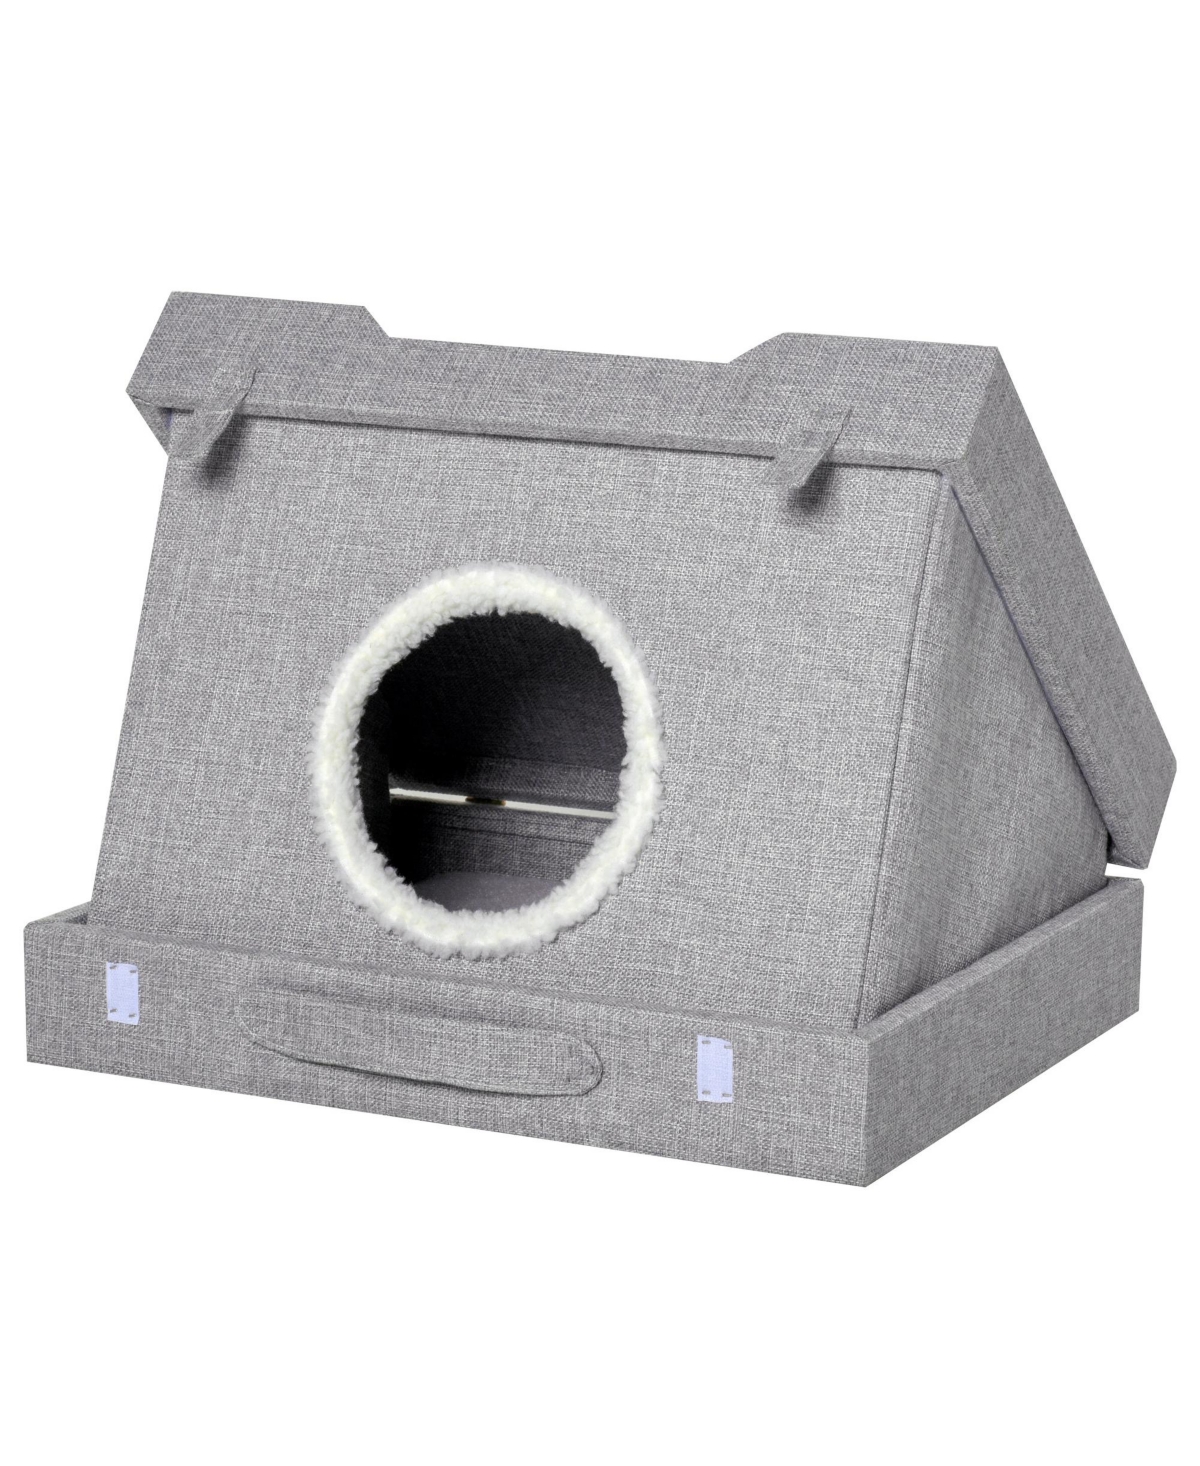 Cat House Foldable Kitten Condo Pet Bed w/ Soft Cushion Scratching Pad - Grey